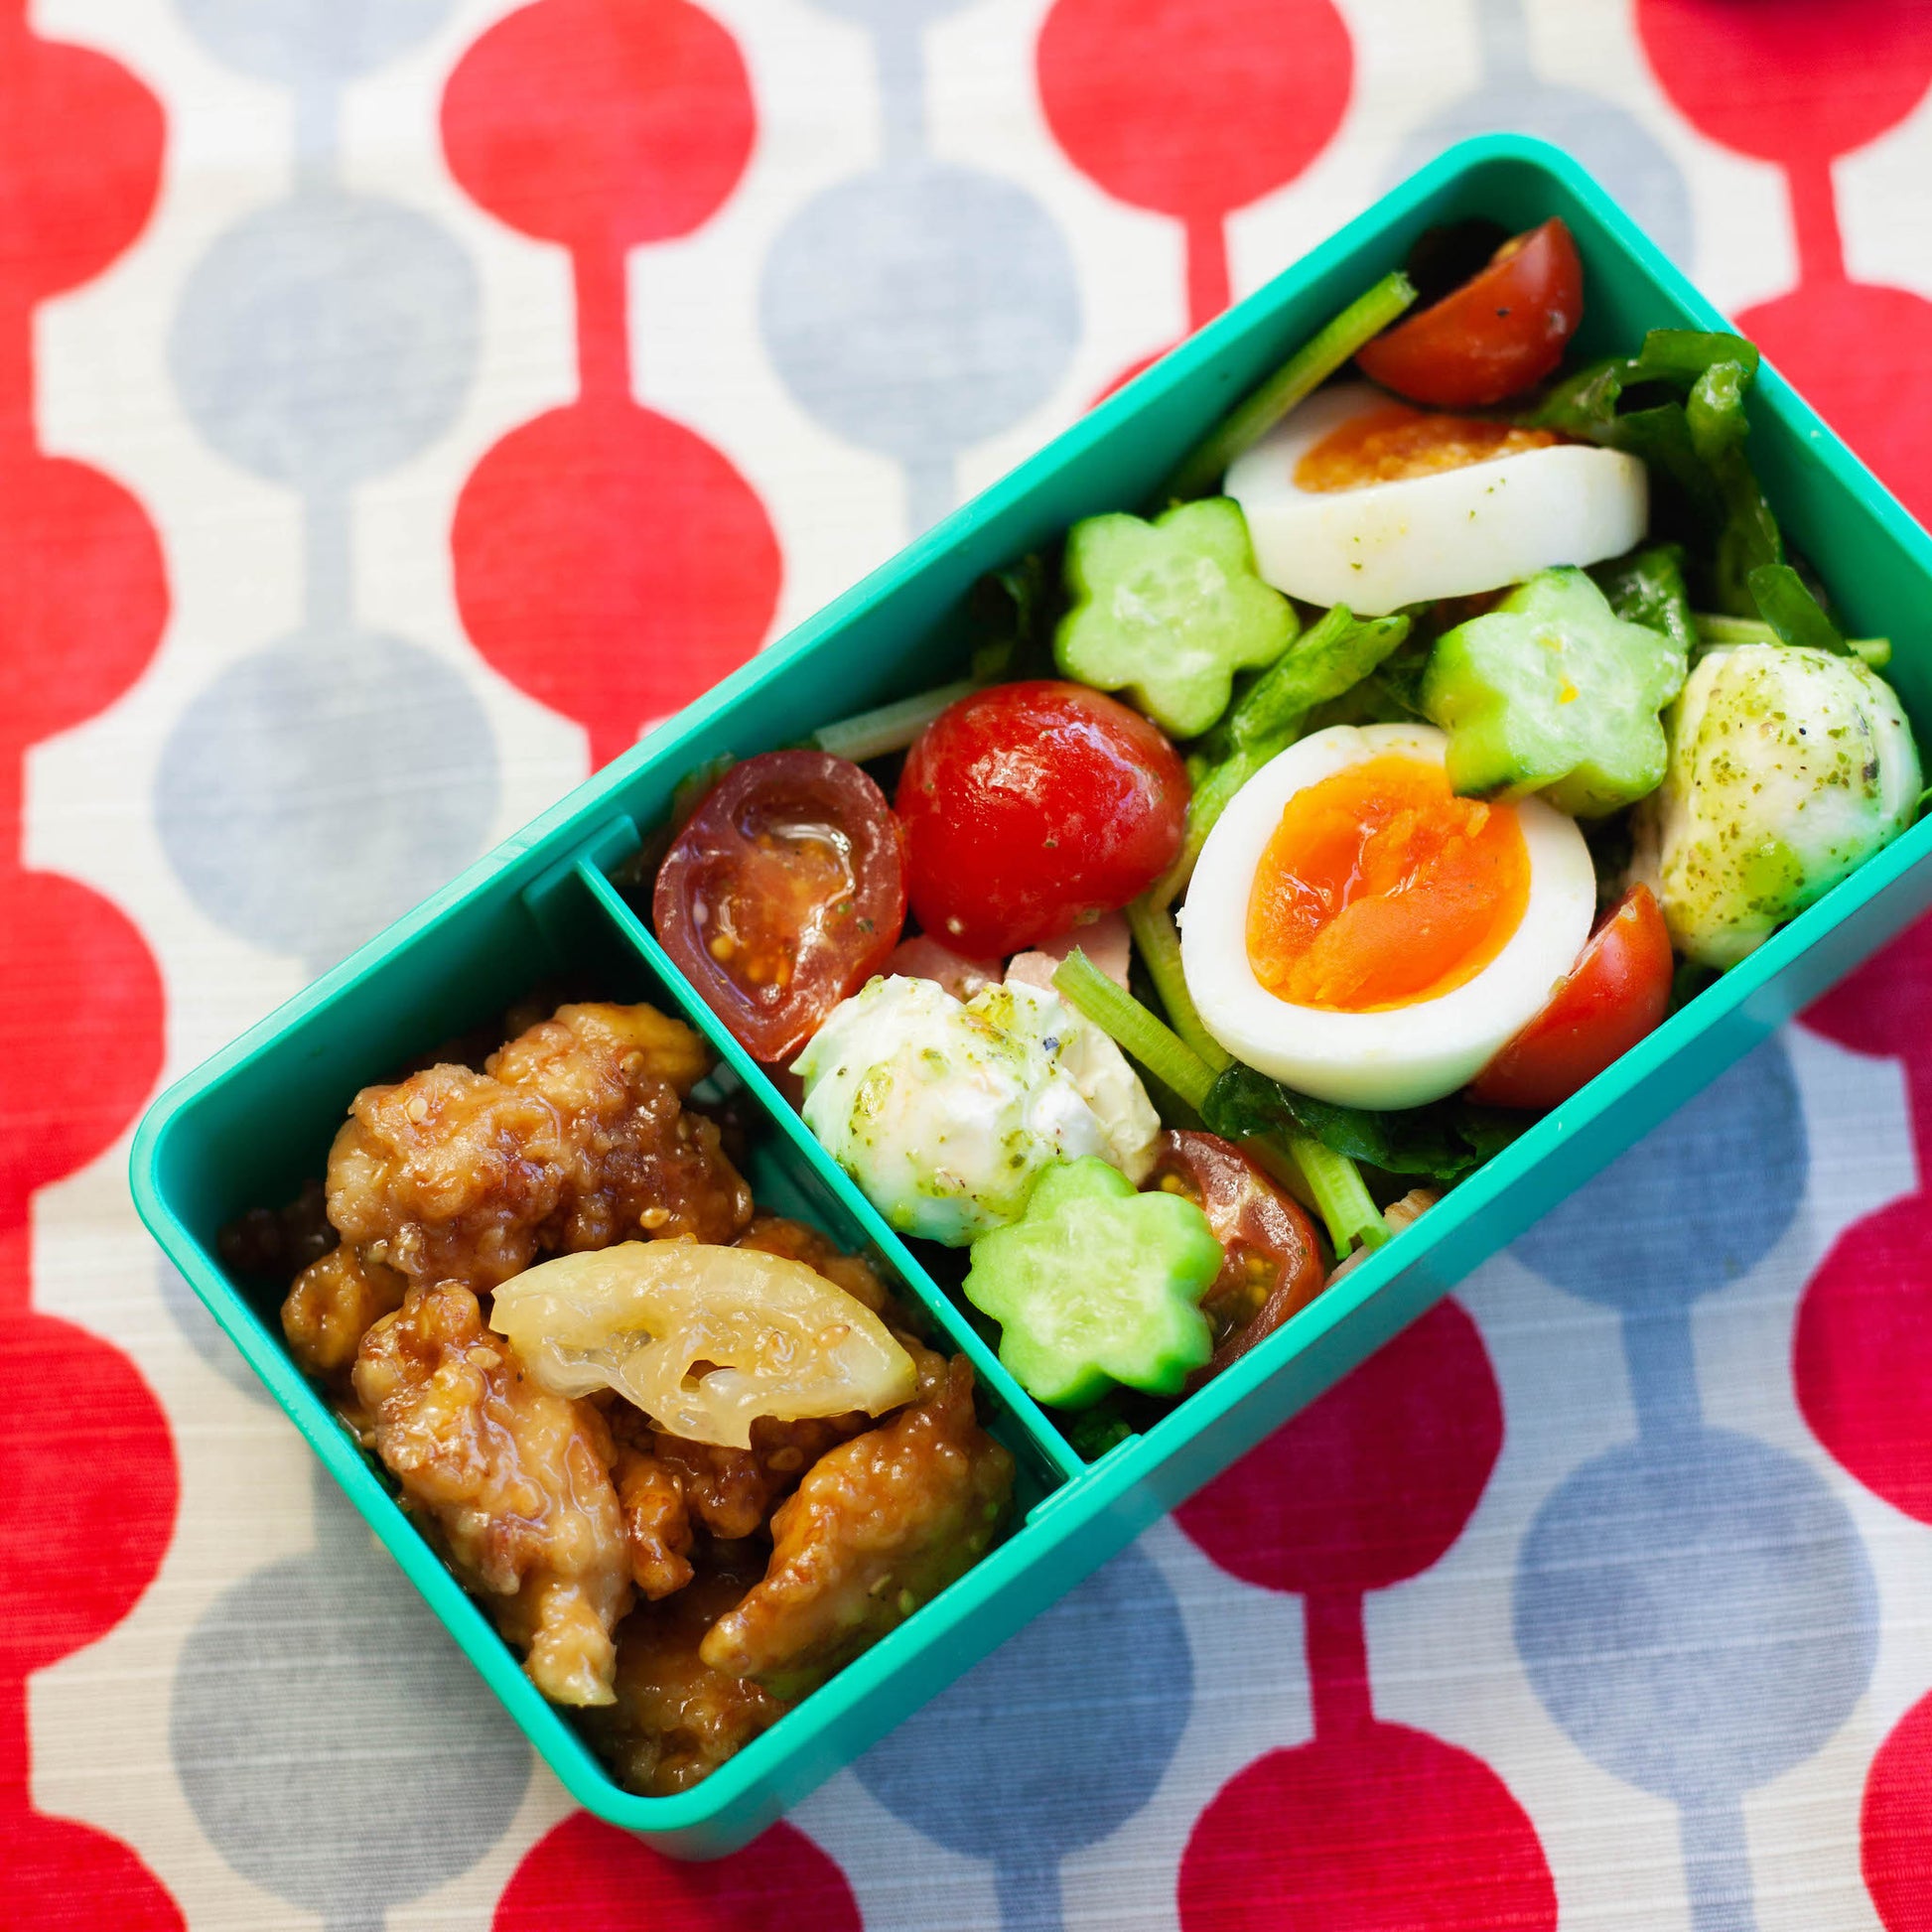 Japanese Lunch Boxes | Gel Cool